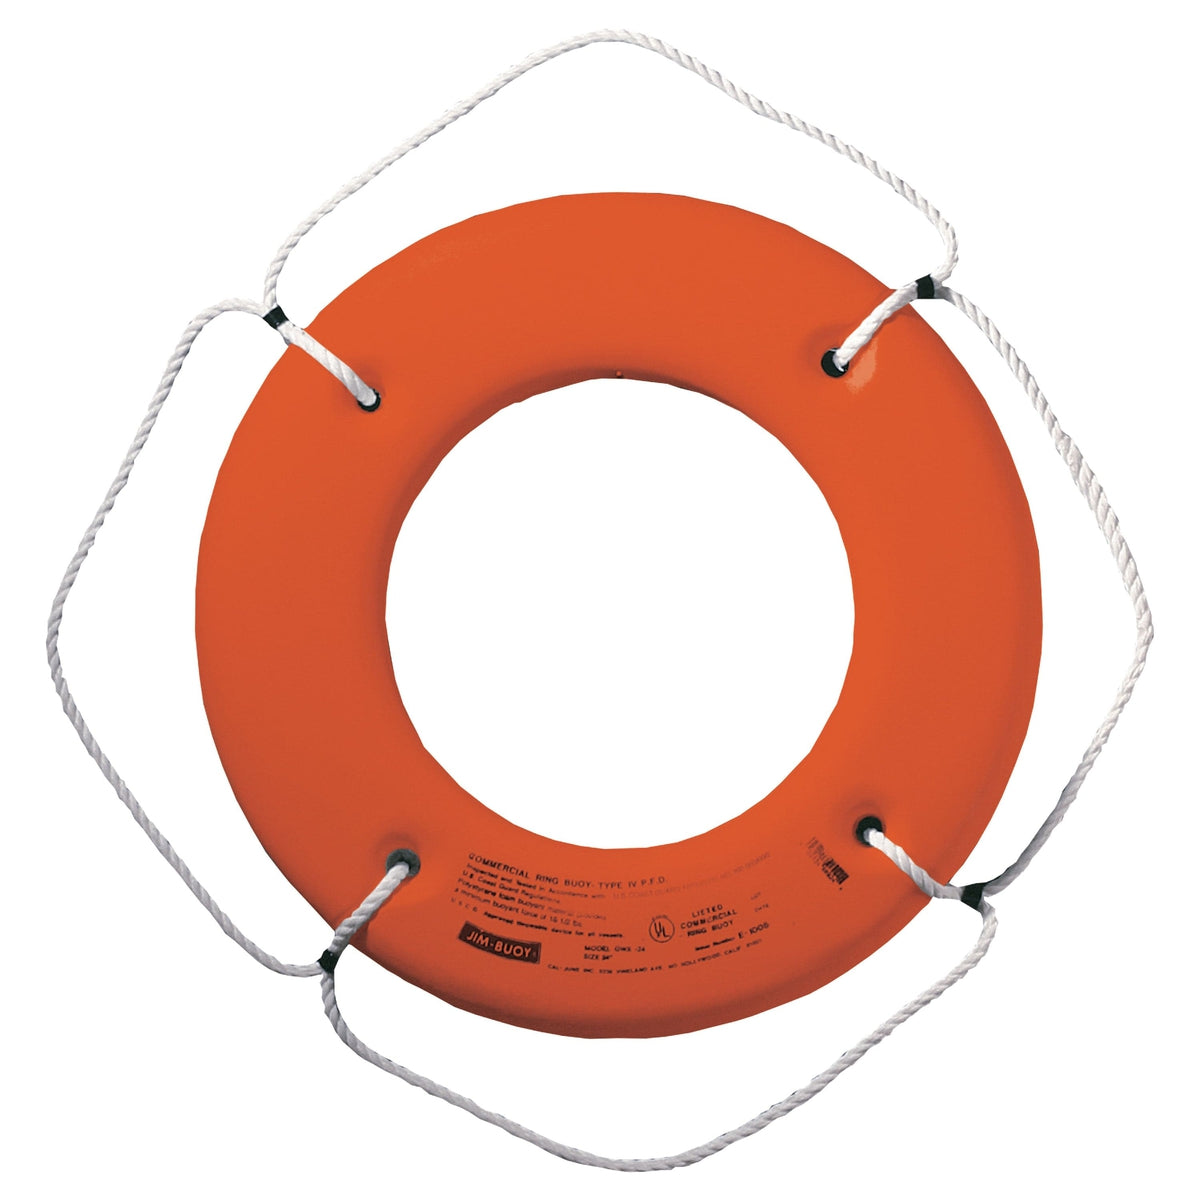 Cal-june Qualifies for Free Shipping Cal-June Canada Hard Shell Lifebuoy Small Vessel 24" Orange #C HS-24 O